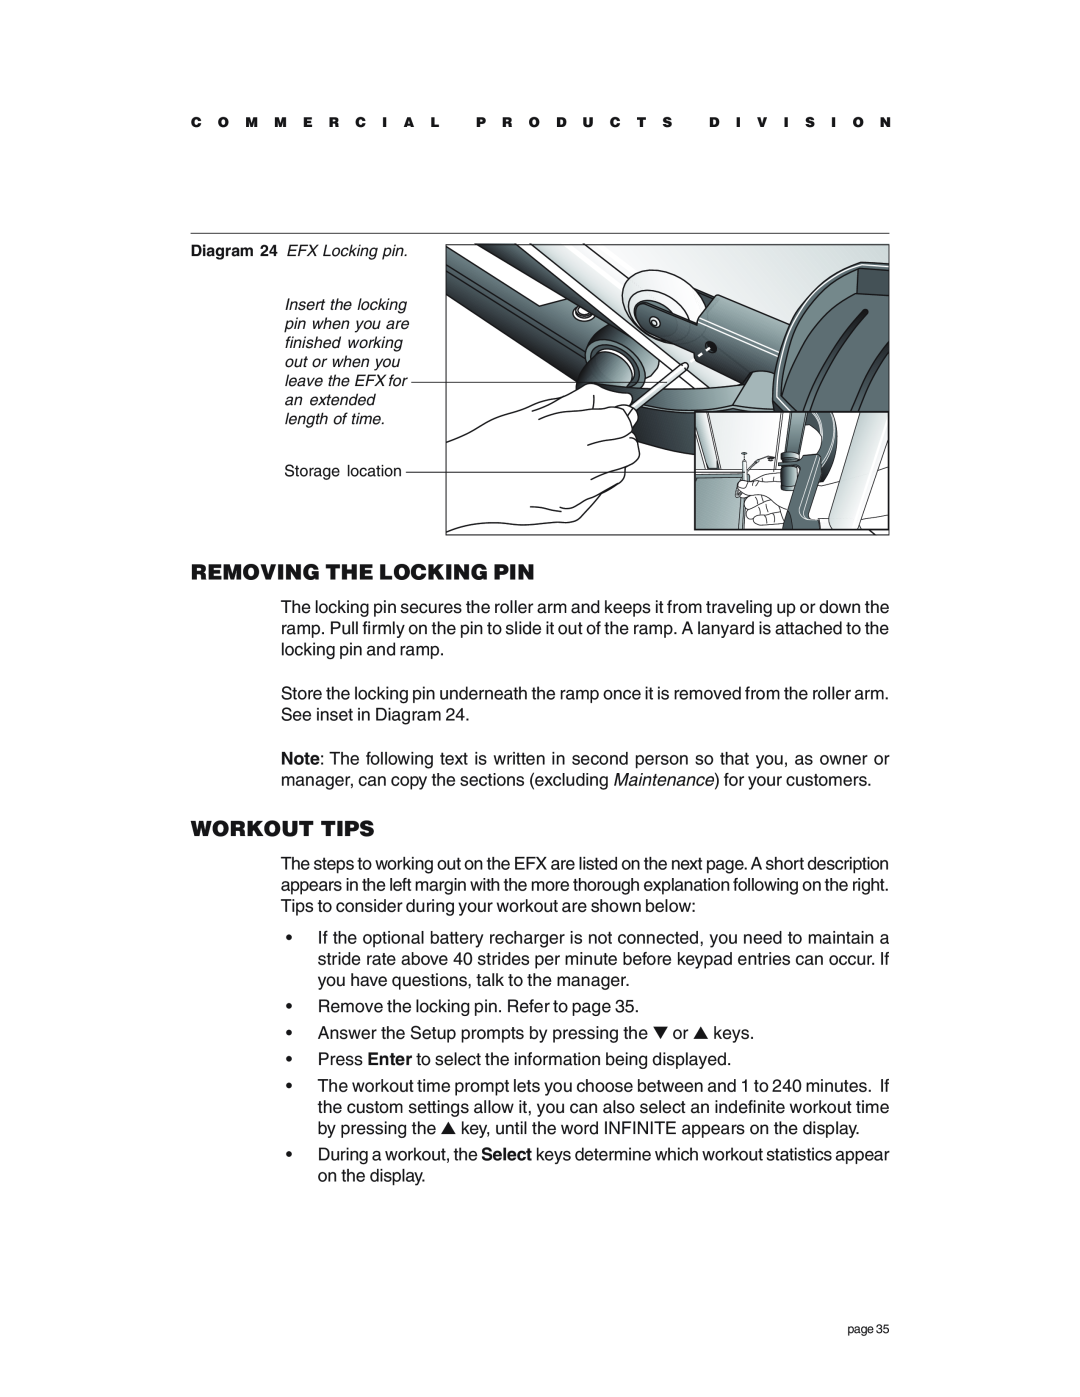 Precor EFX534 owner manual Workout Tips, Removing The Locking Pin 